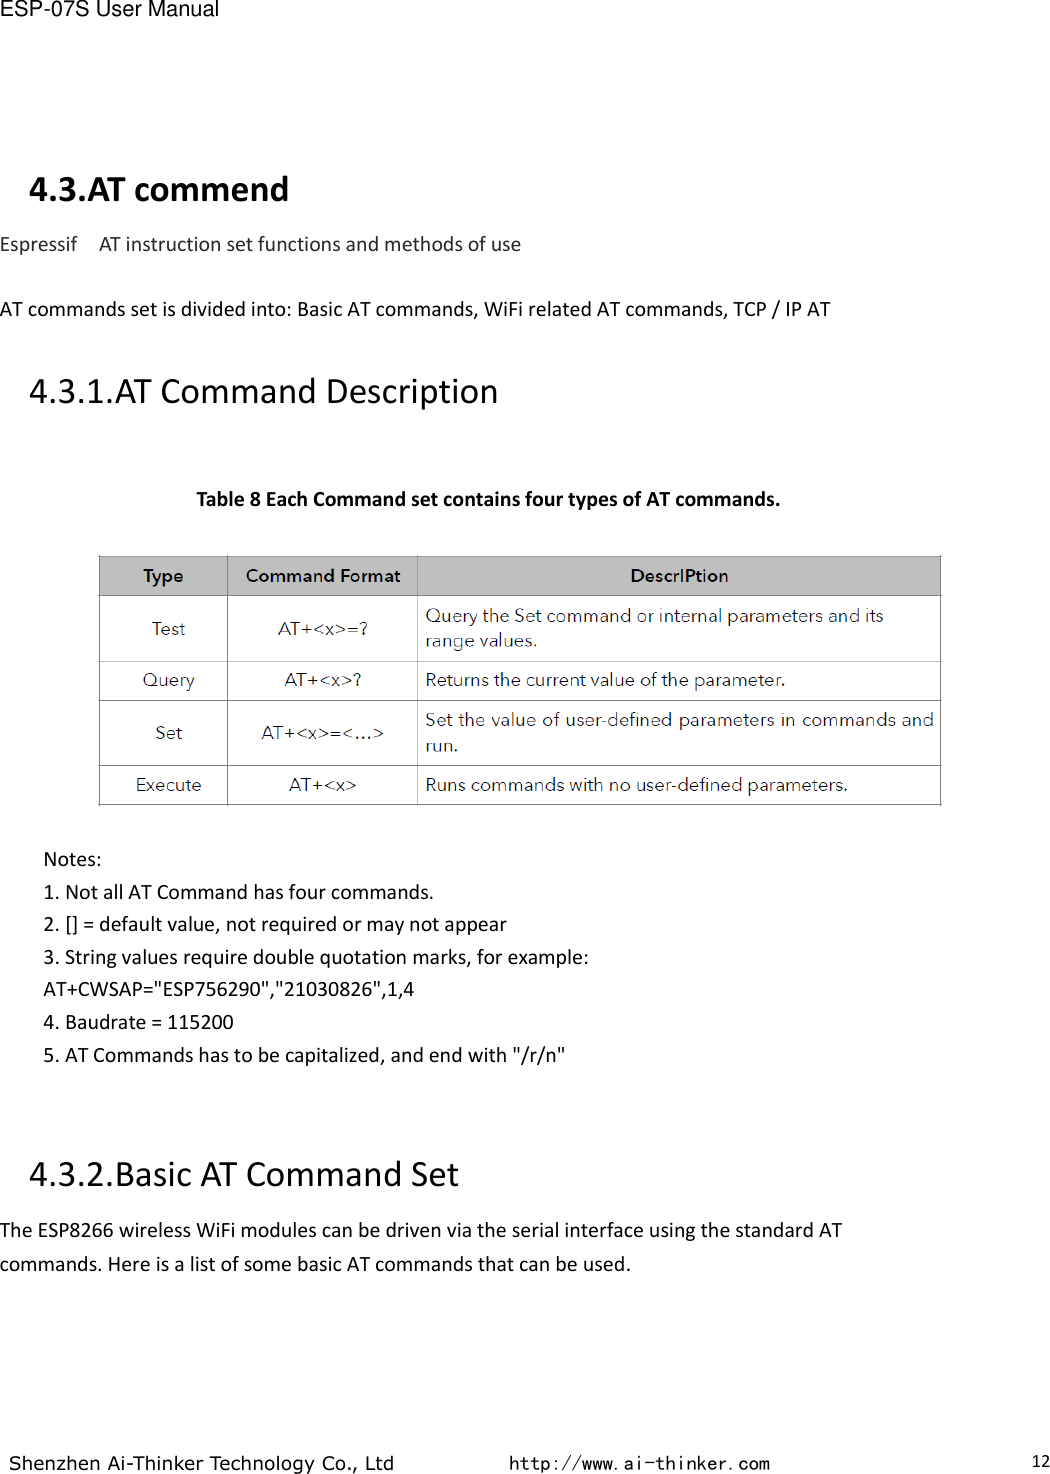 ESP-07S User Manual  Shenzhen Ai-Thinker Technology Co., Ltd           http://www.ai-thinker.com                                                                                     12 4.3.AT commend Espressif    AT instruction set functions and methods of use  AT commands set is divided into: Basic AT commands, WiFi related AT commands, TCP / IP AT  4.3.1.AT Command Description  Table 8 Each Command set contains four types of AT commands.  Notes: 1. Not all AT Command has four commands. 2. [] = default value, not required or may not appear 3. String values require double quotation marks, for example: AT+CWSAP=&quot;ESP756290&quot;,&quot;21030826&quot;,1,4 4. Baudrate = 115200 5. AT Commands has to be capitalized, and end with &quot;/r/n&quot;  4.3.2.Basic AT Command Set The ESP8266 wireless WiFi modules can be driven via the serial interface using the standard AT commands. Here is a list of some basic AT commands that can be used.            